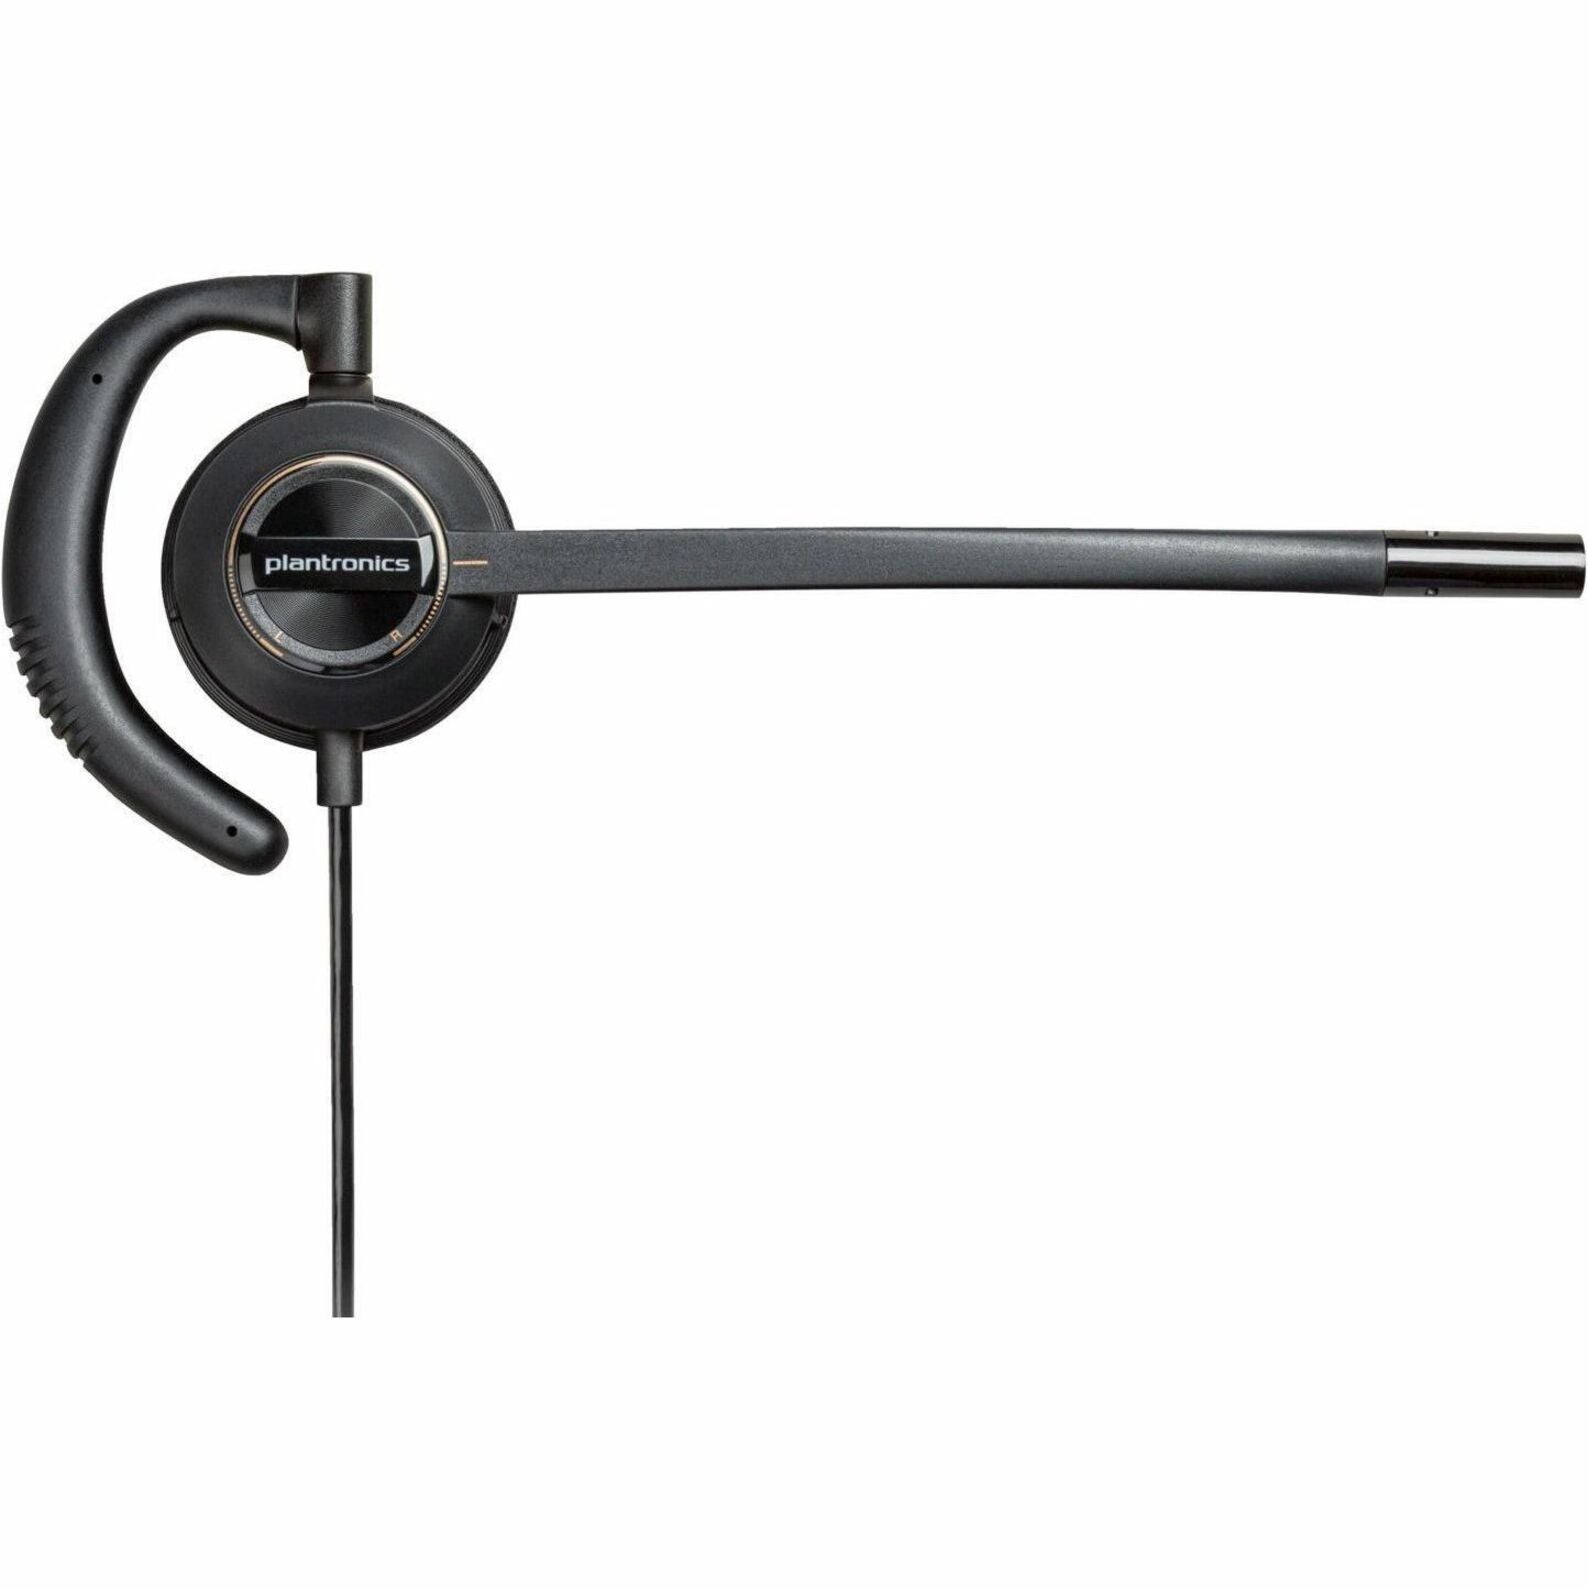 Poly EncorePro HW530 Quick Disconnect Headset, Monaural On-ear, Noise Cancelling, PC Mac Compatible